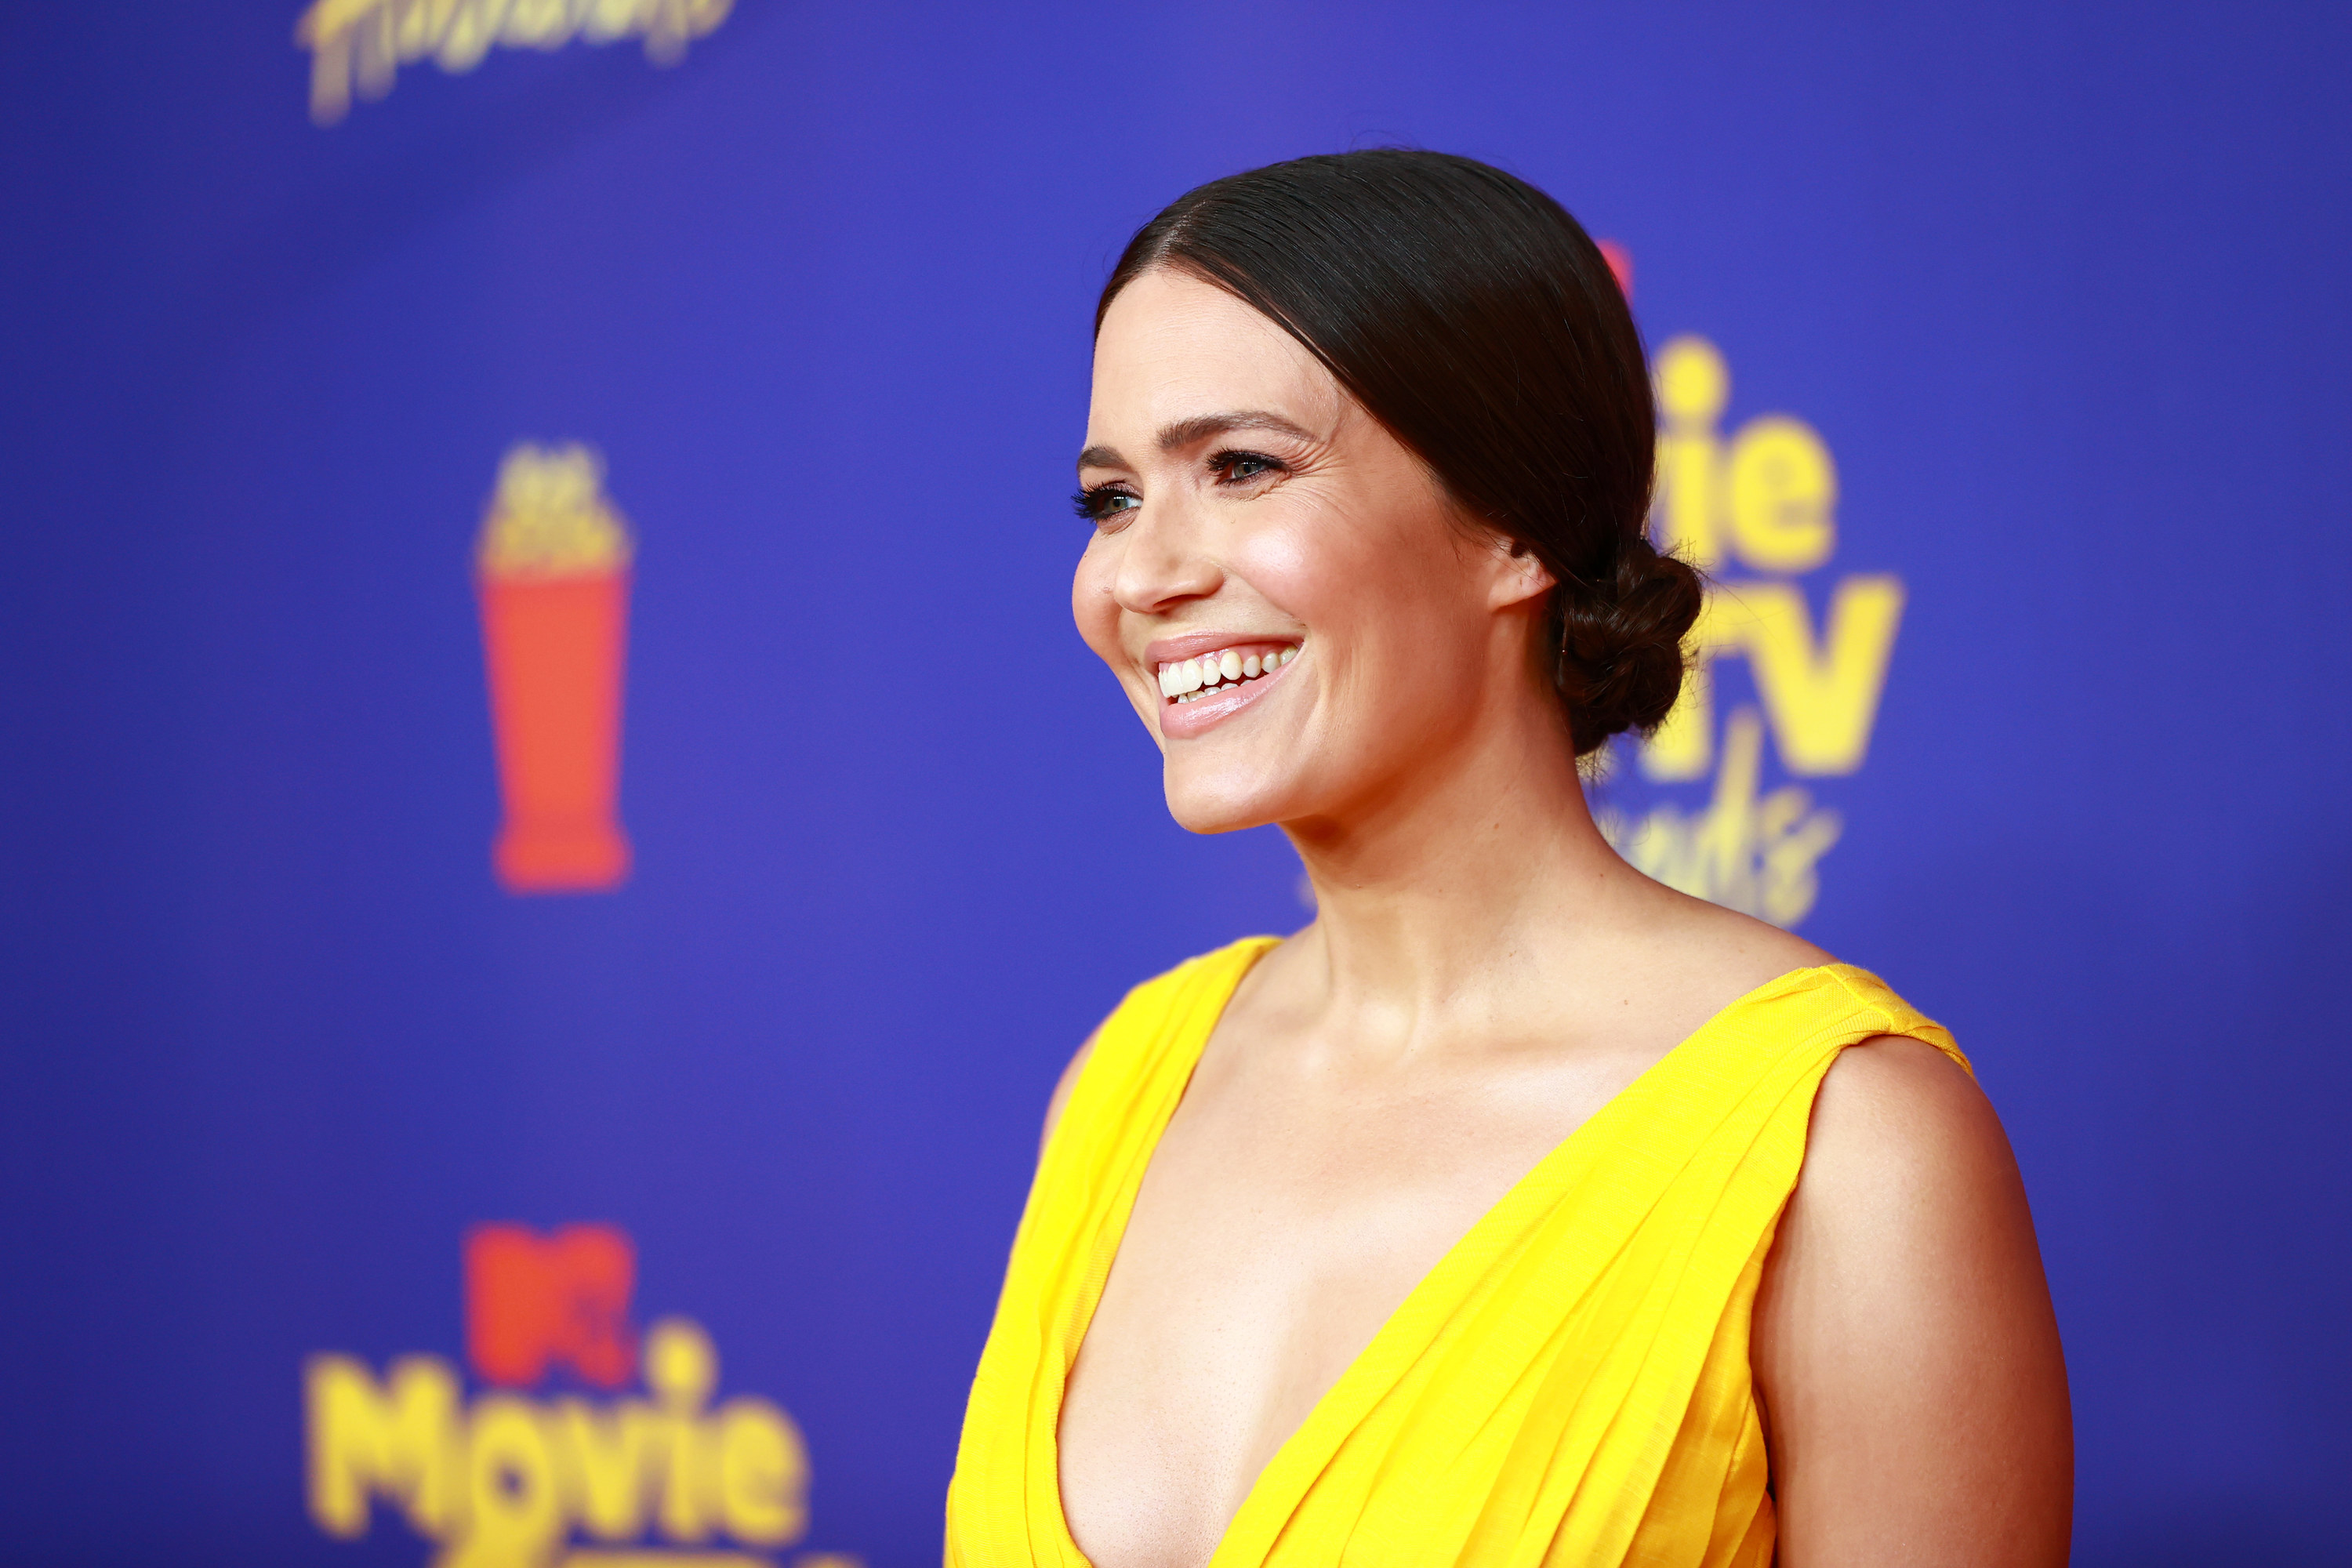 Photo of Mandy Moore in a bright yellow dress smiling at something off-camera